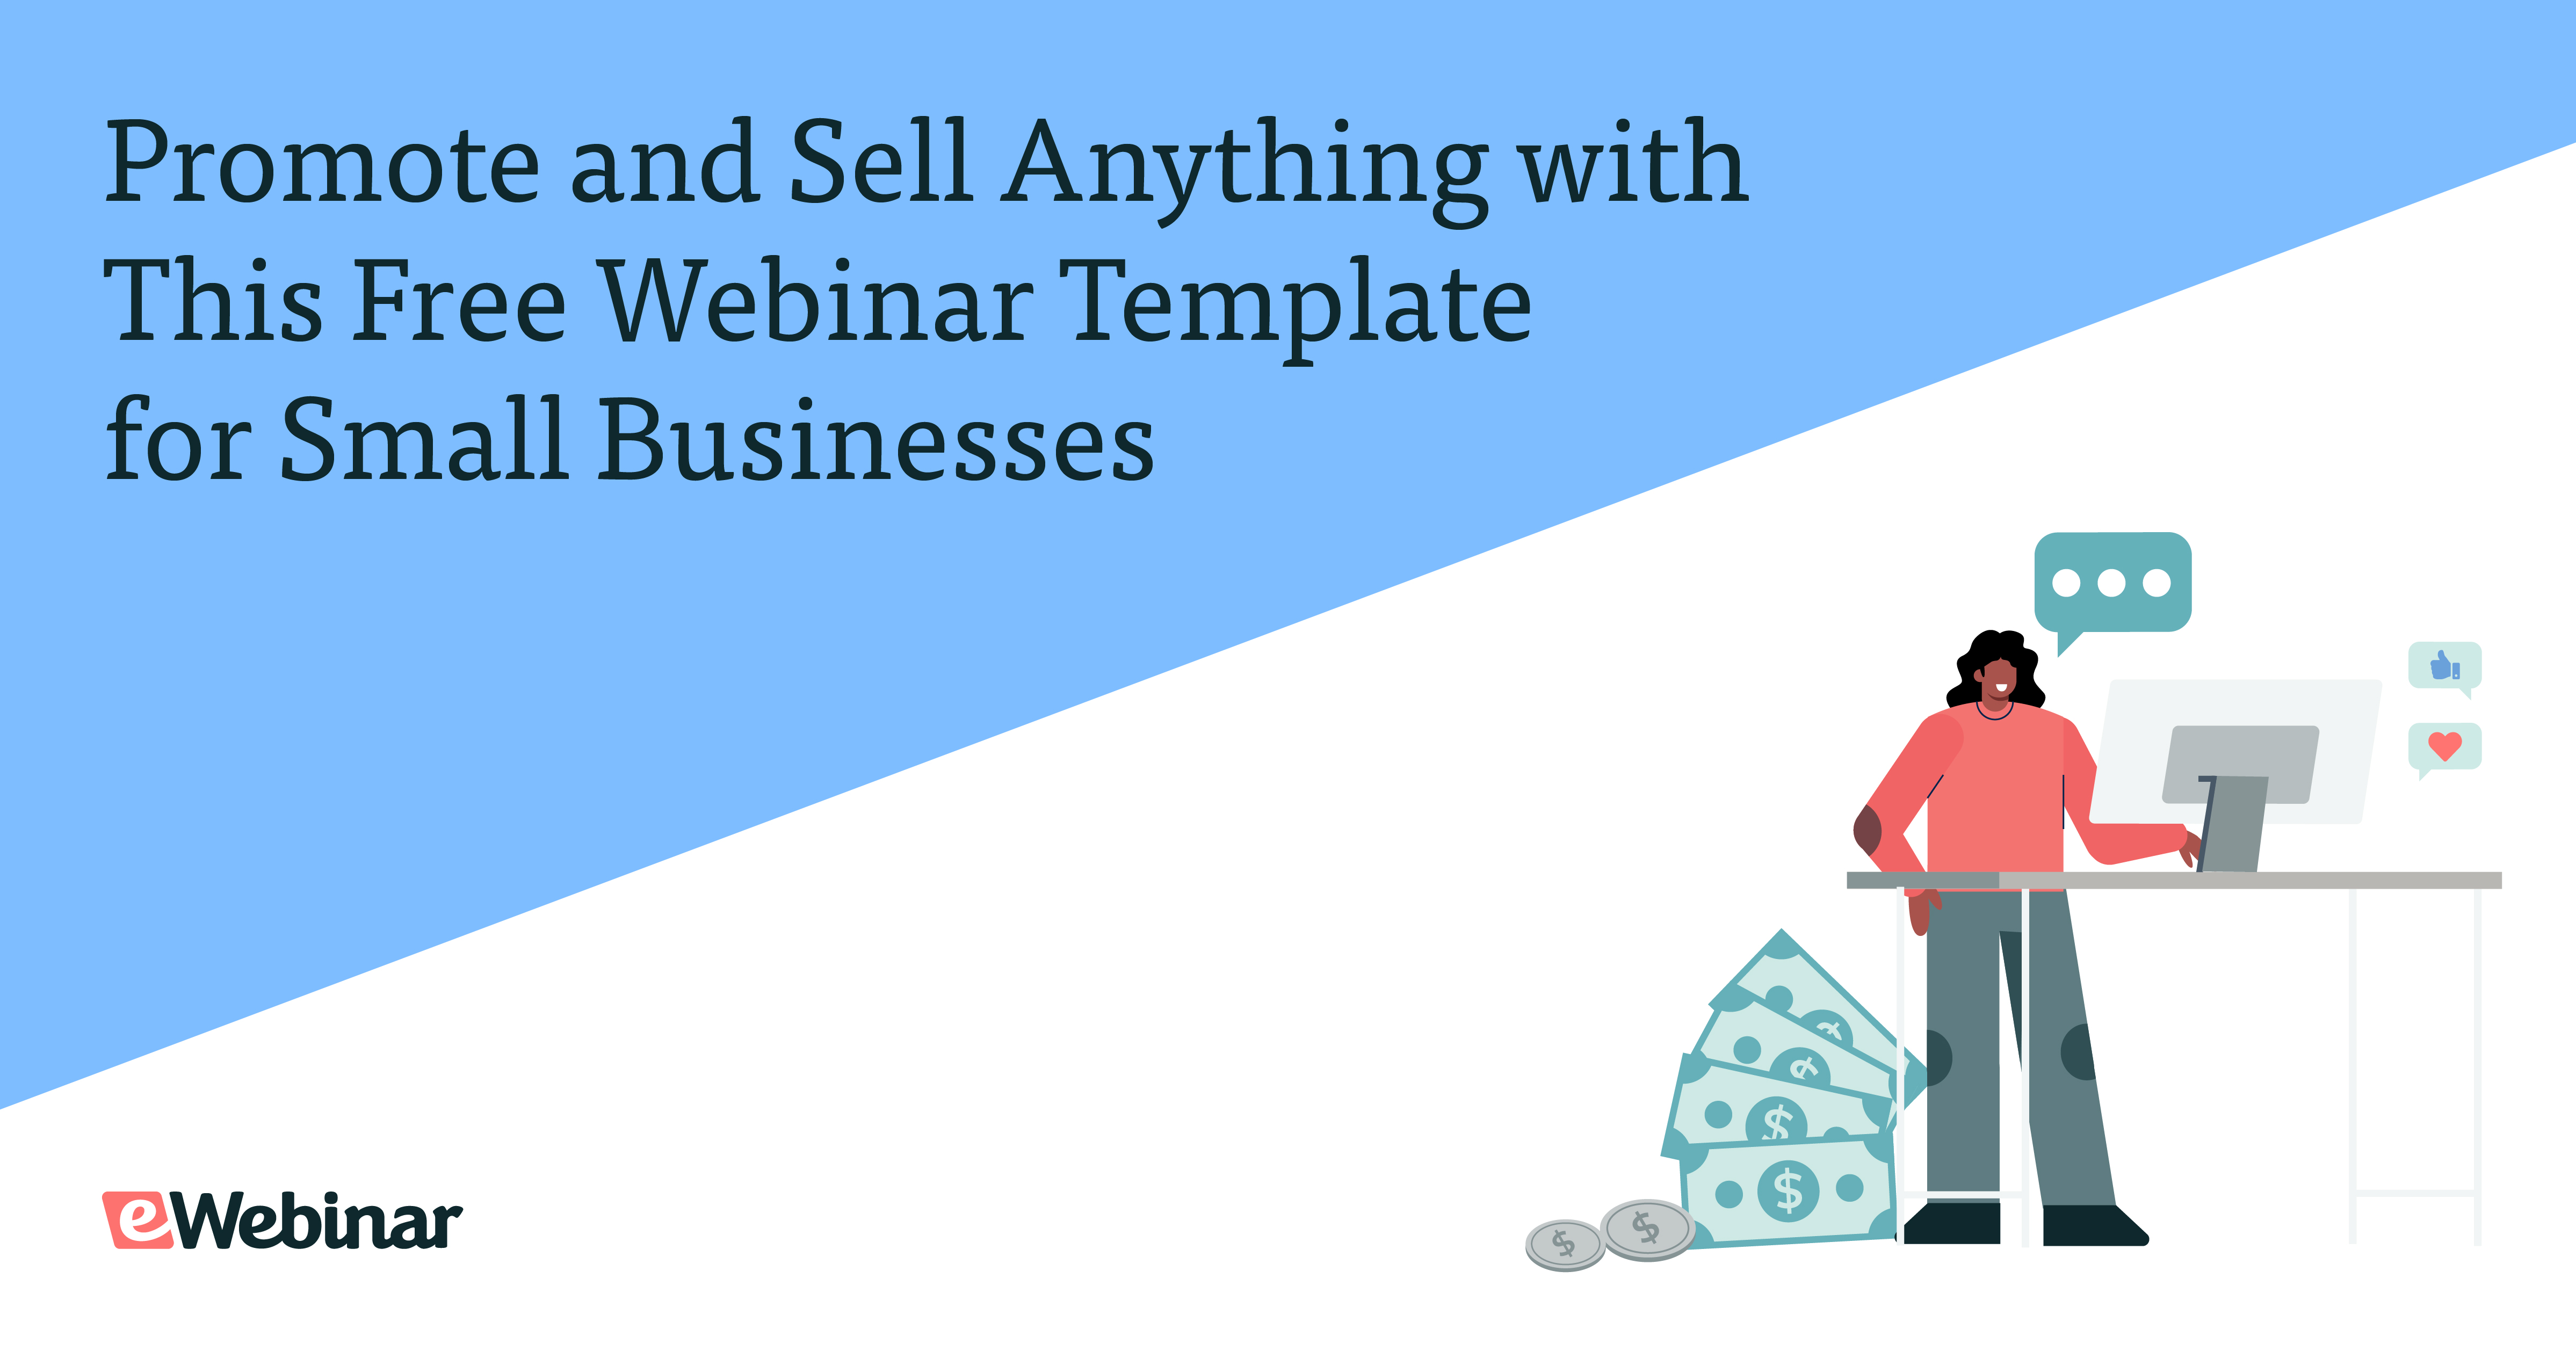 Promote and Sell Anything with This Free Webinar Template for Small Businesses